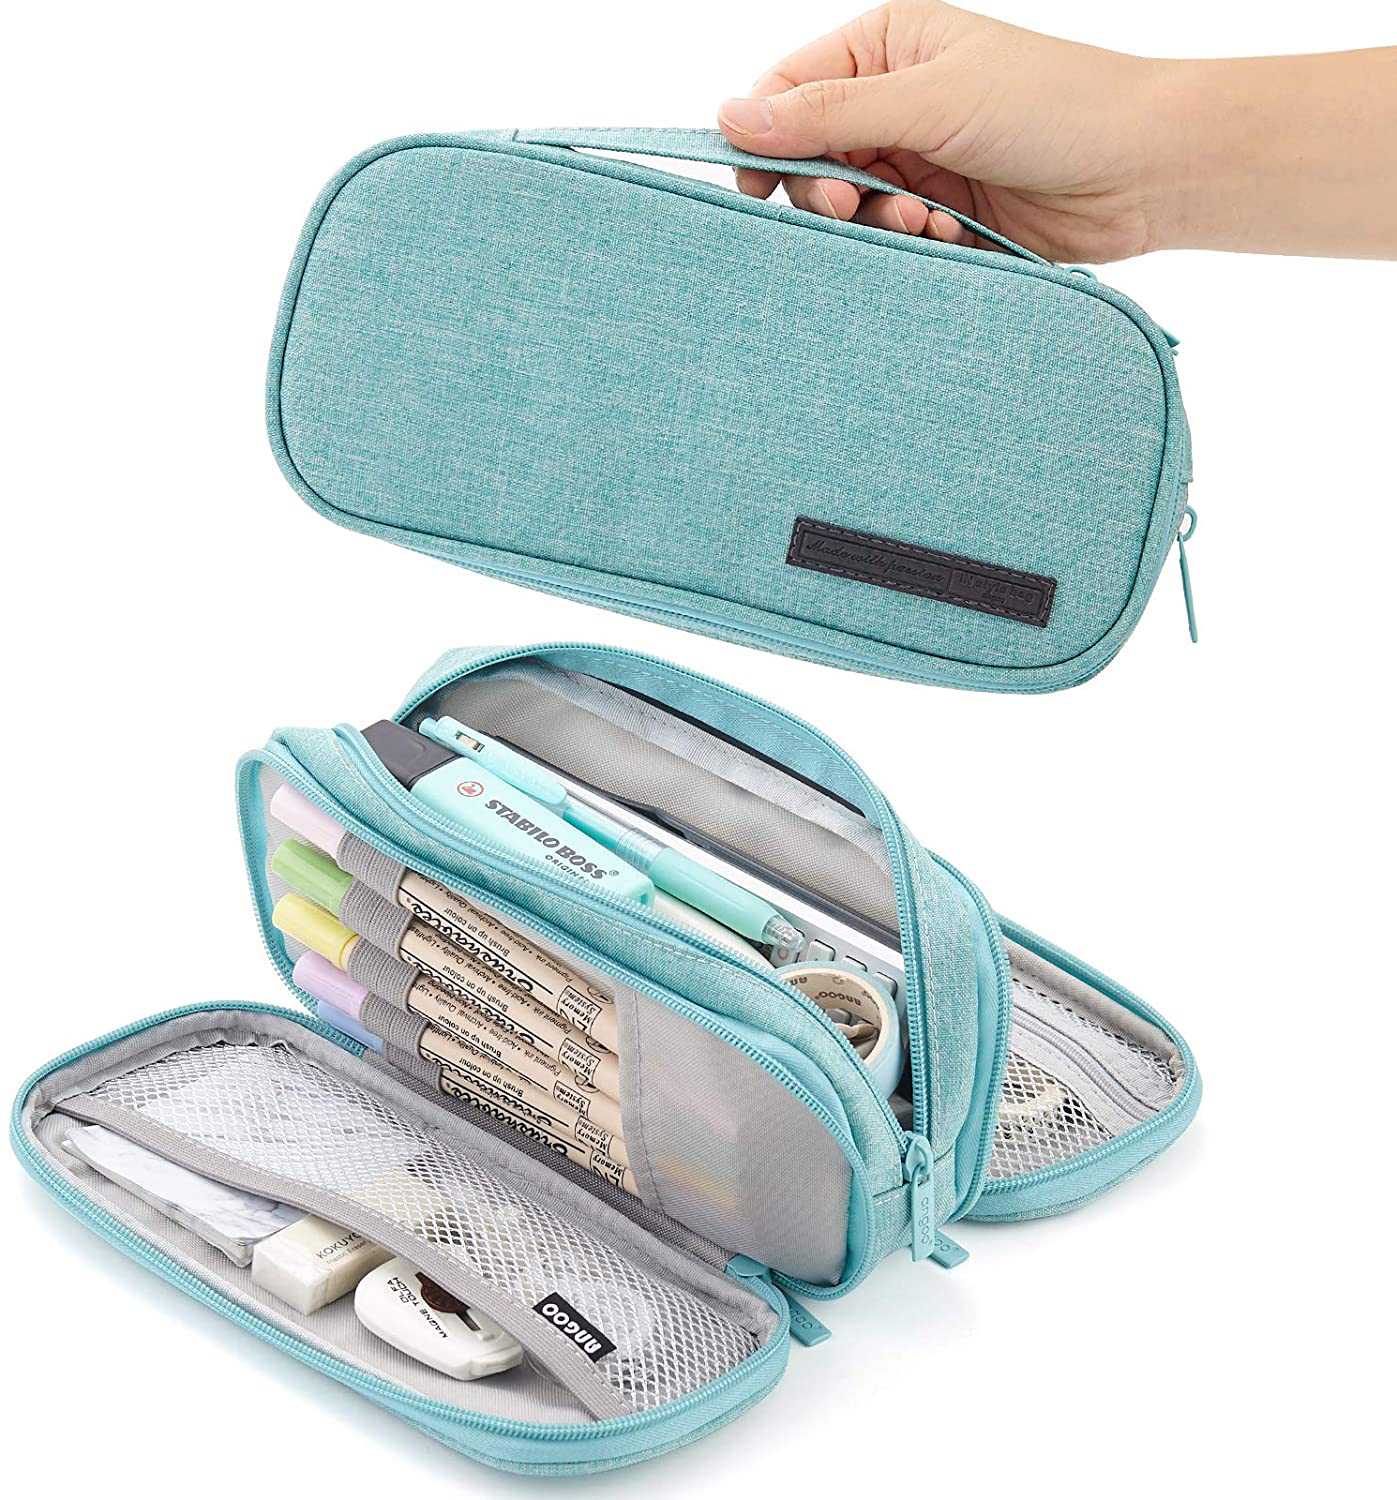 Pencil Case Big Capacity Handheld 3 Compartments Pencil Pouch Portable Large Storage Canvas Pencil Bag for Boys Girls Adults Students Business Office